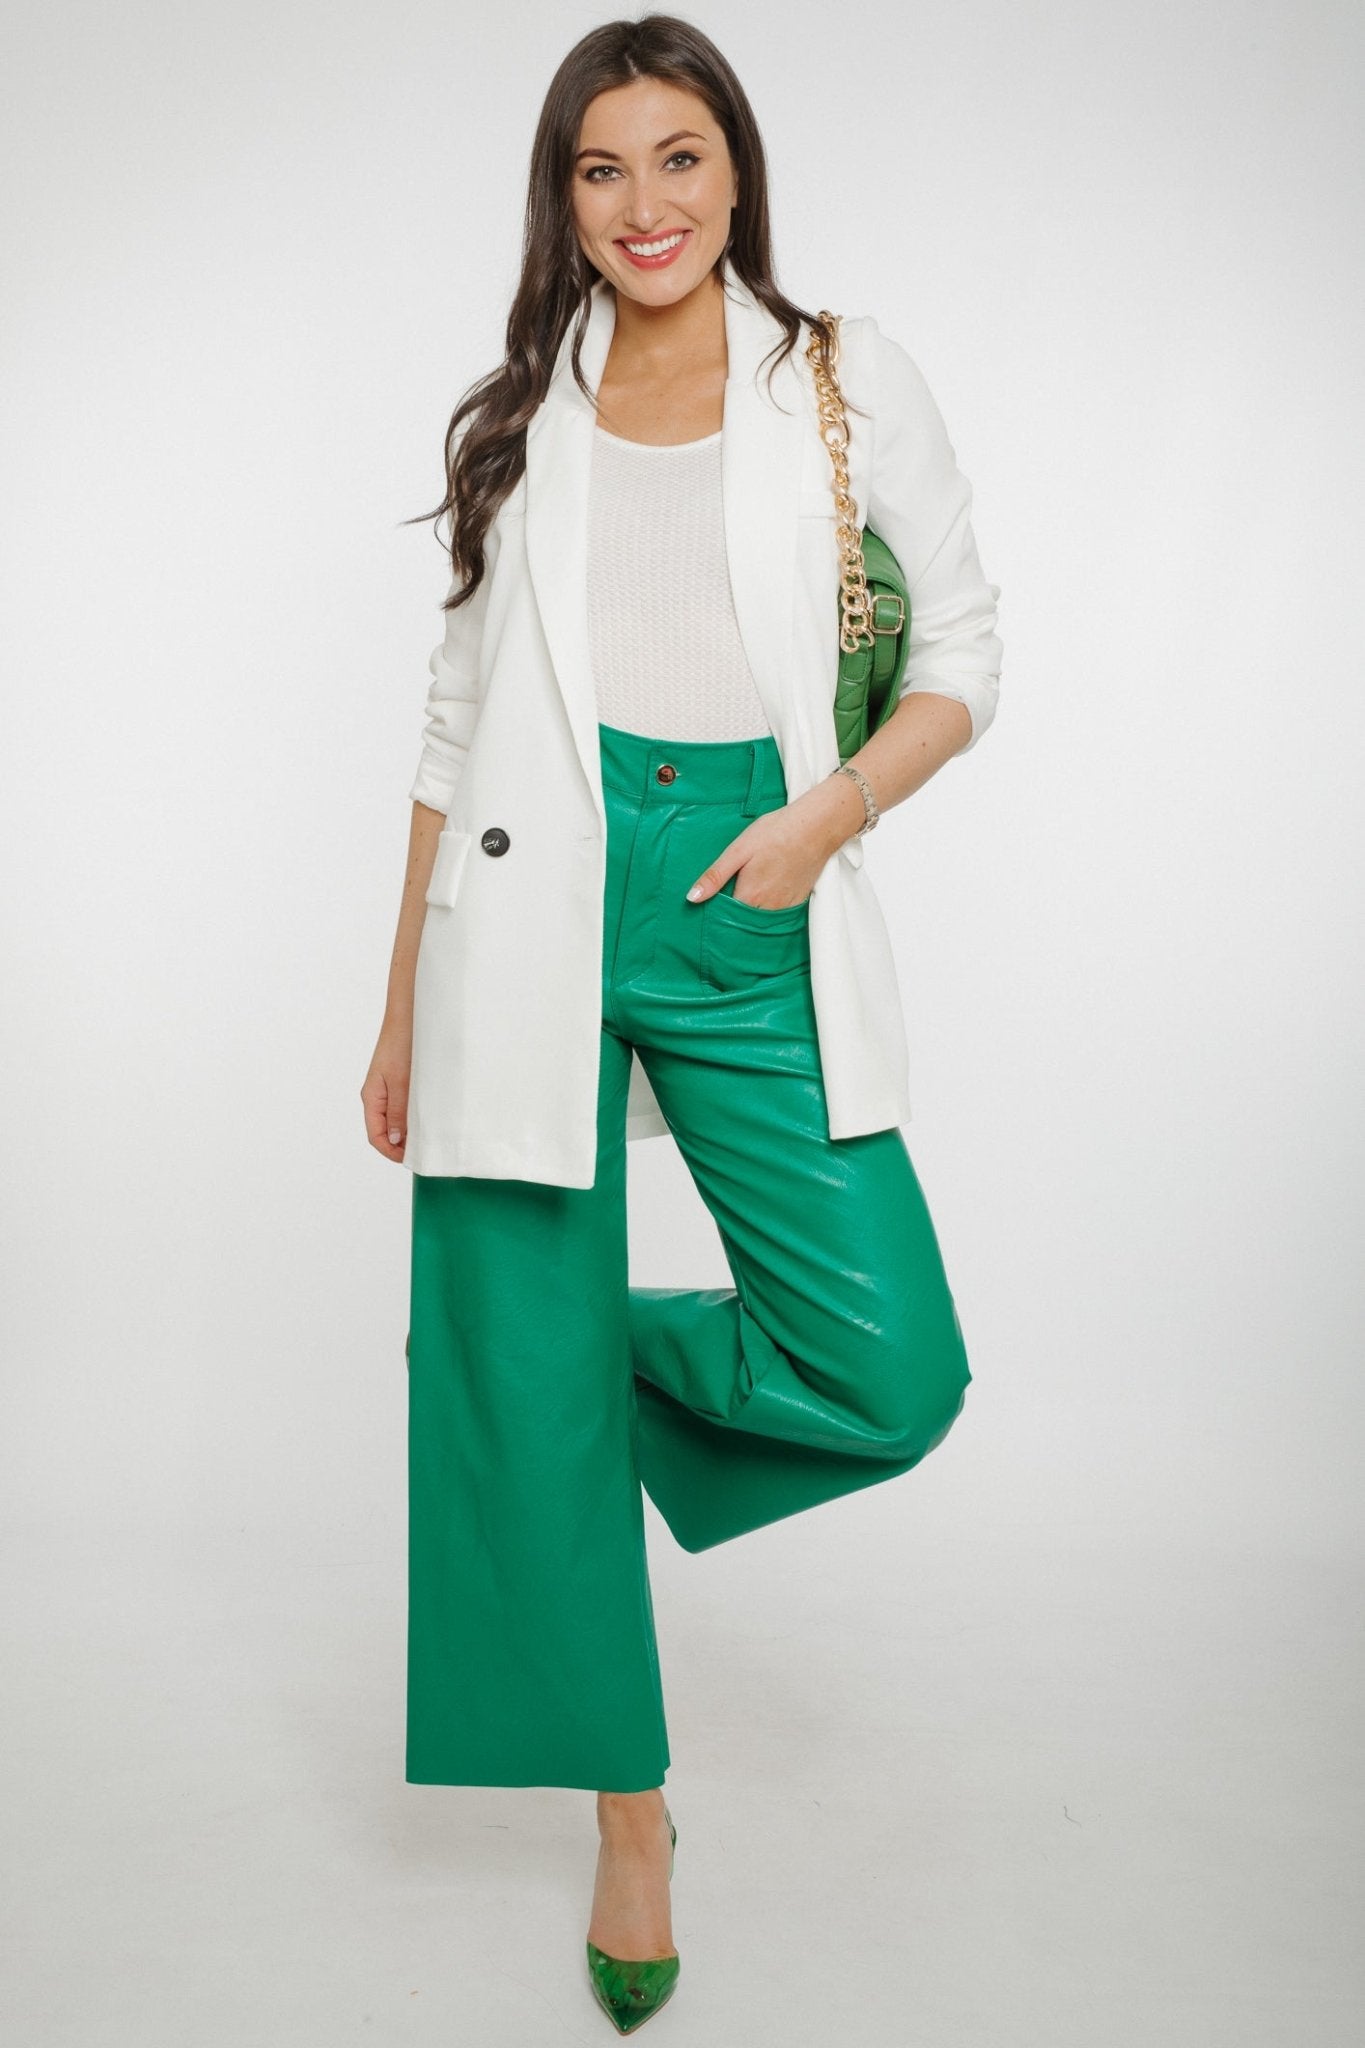 Polly Faux Leather Trouser In Green - The Walk in Wardrobe